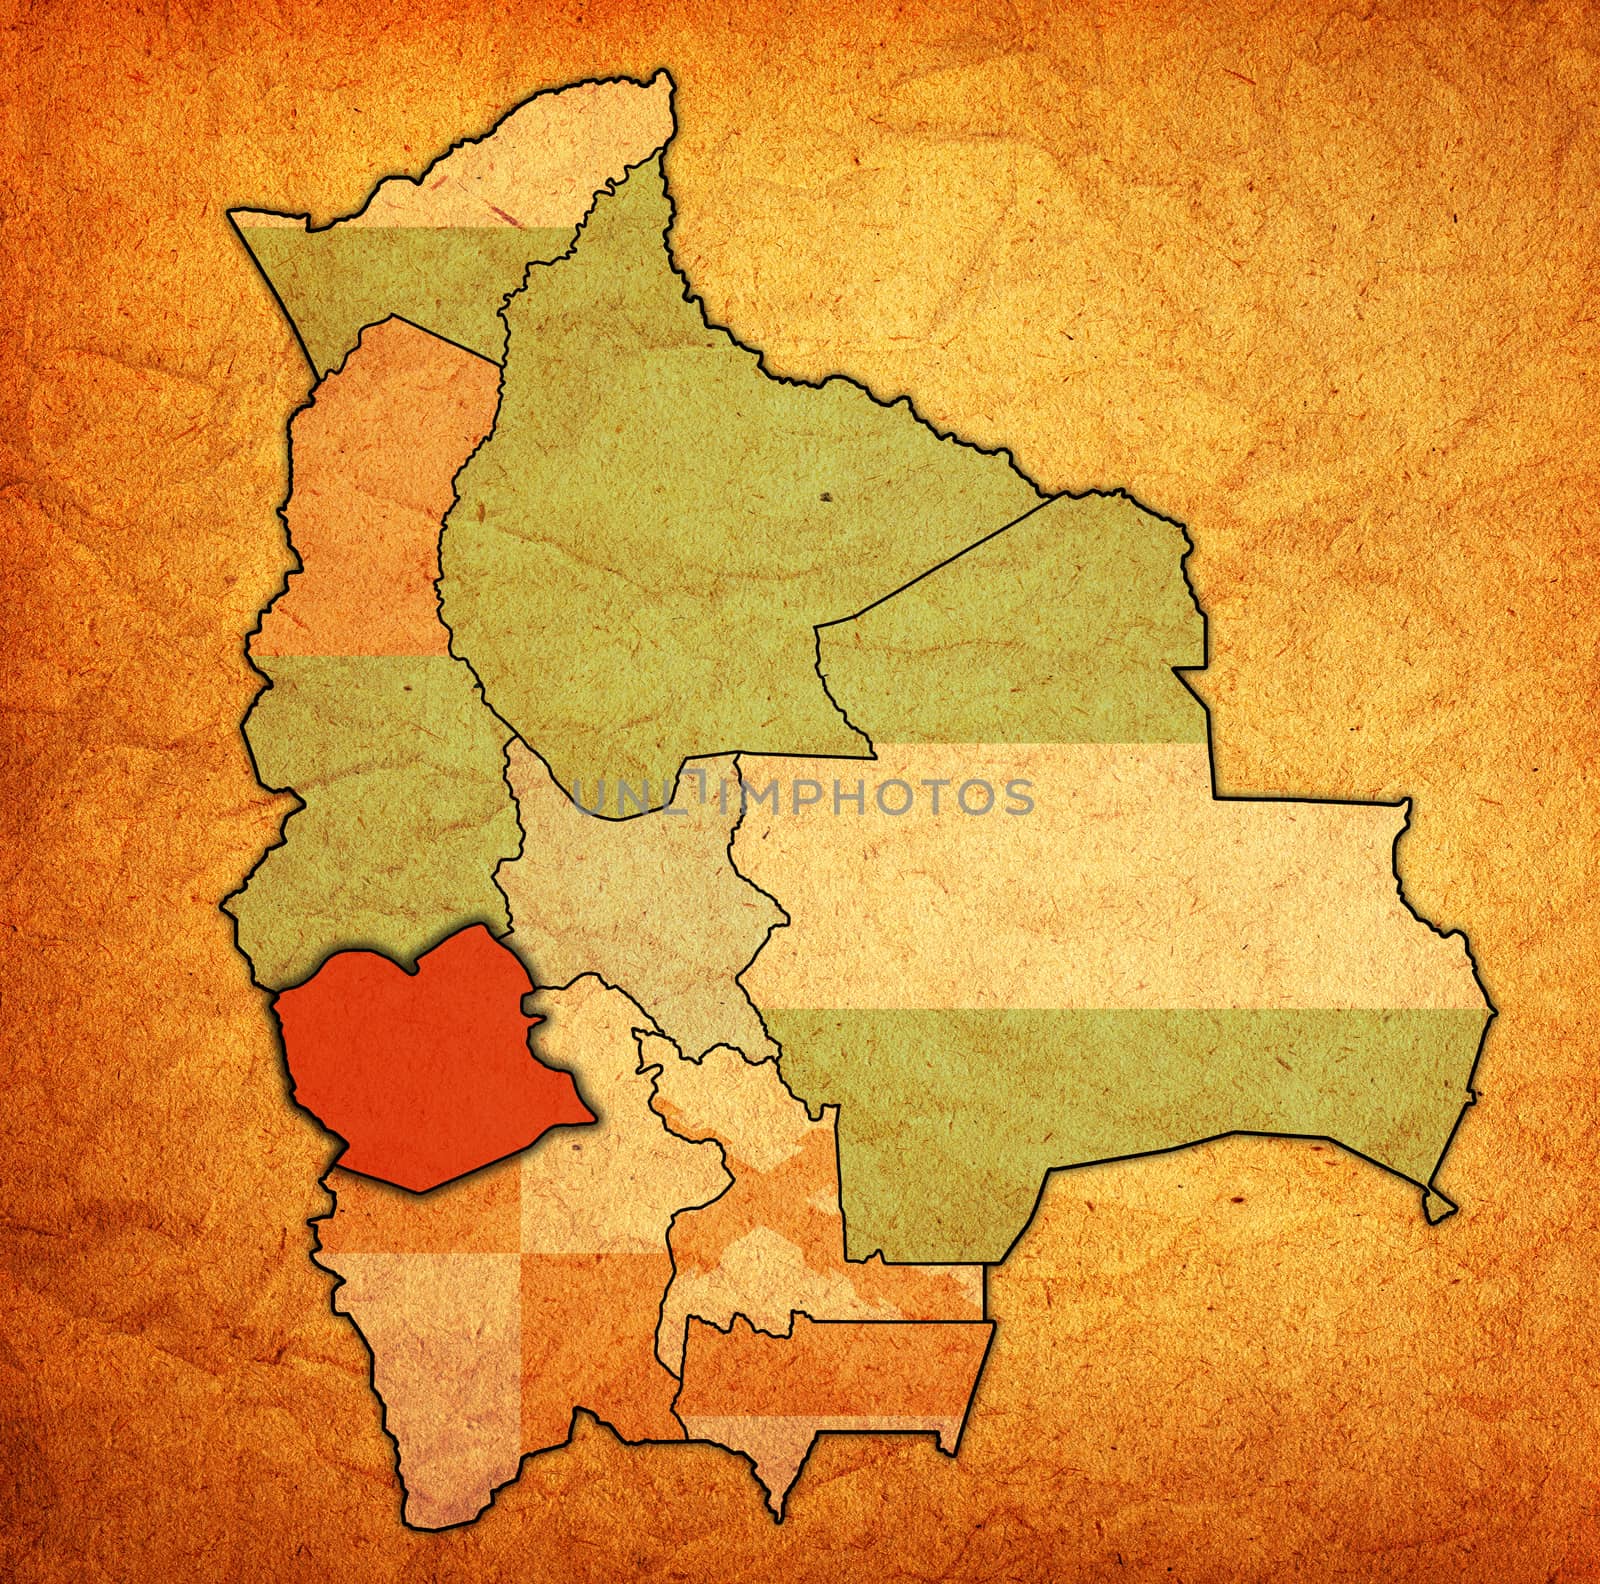 territory and flag of Oruro region on map with administrative divisions and borders of Bolivia with clipping path